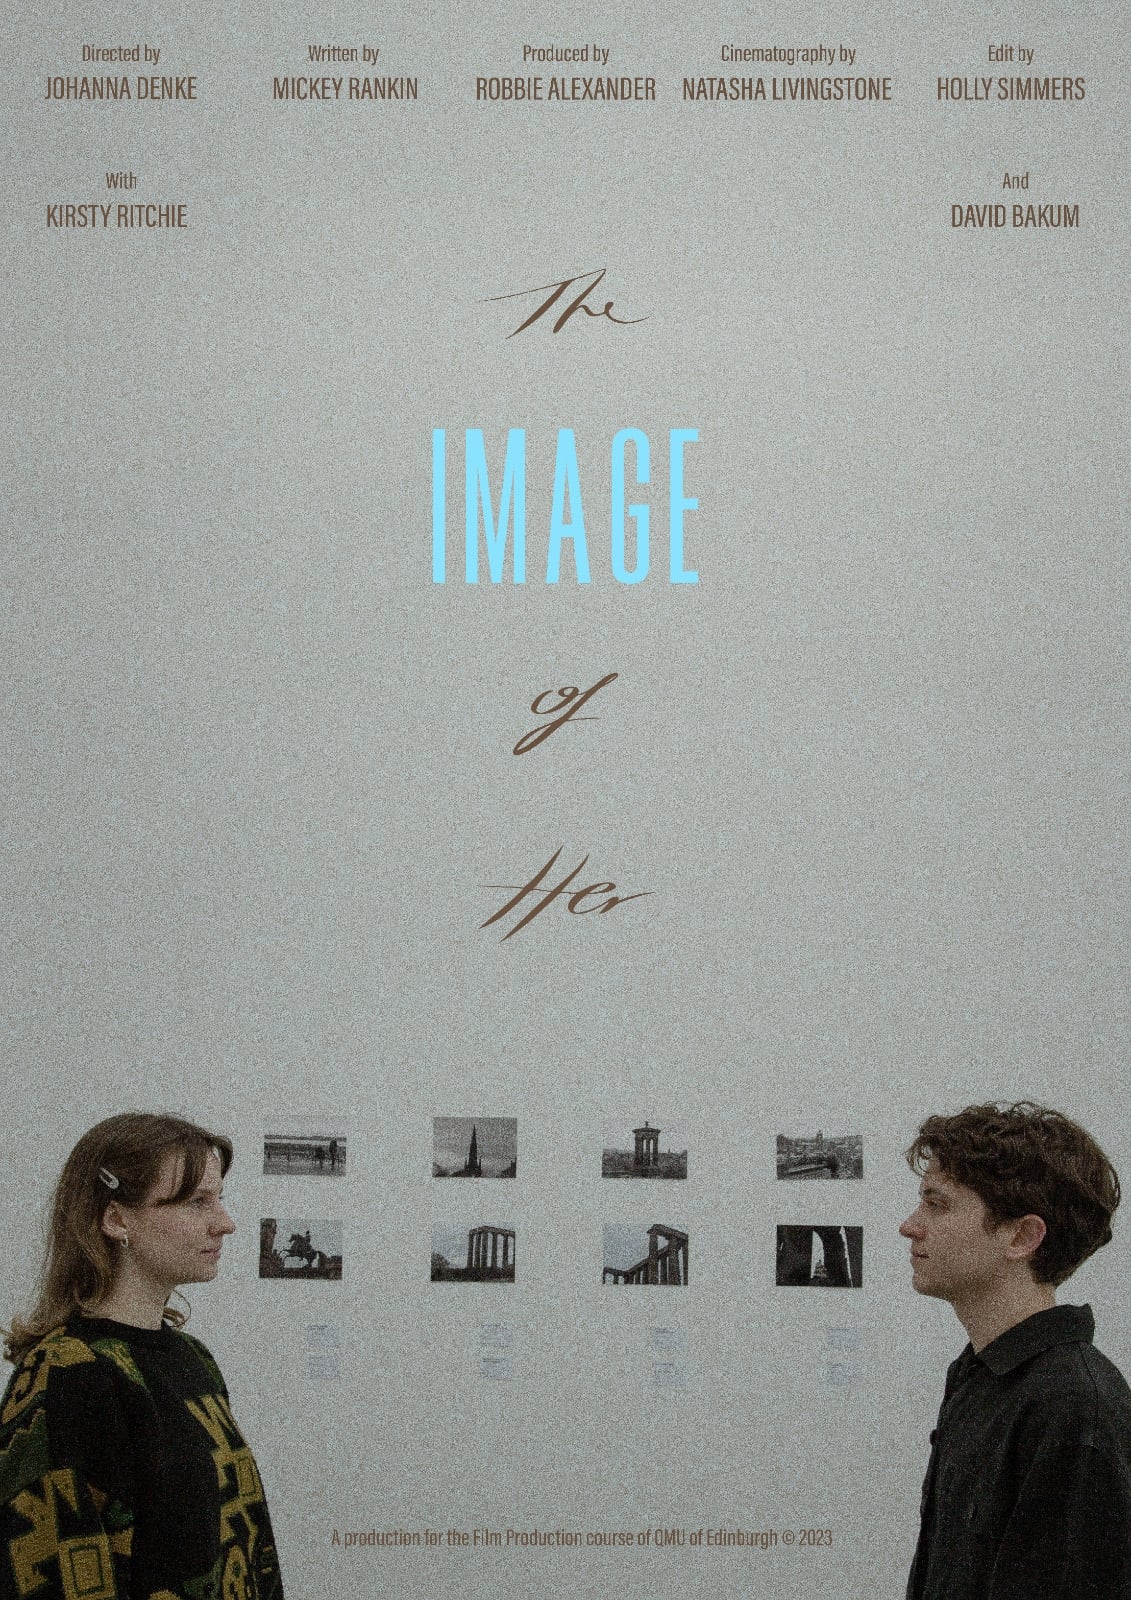 The Image of Her